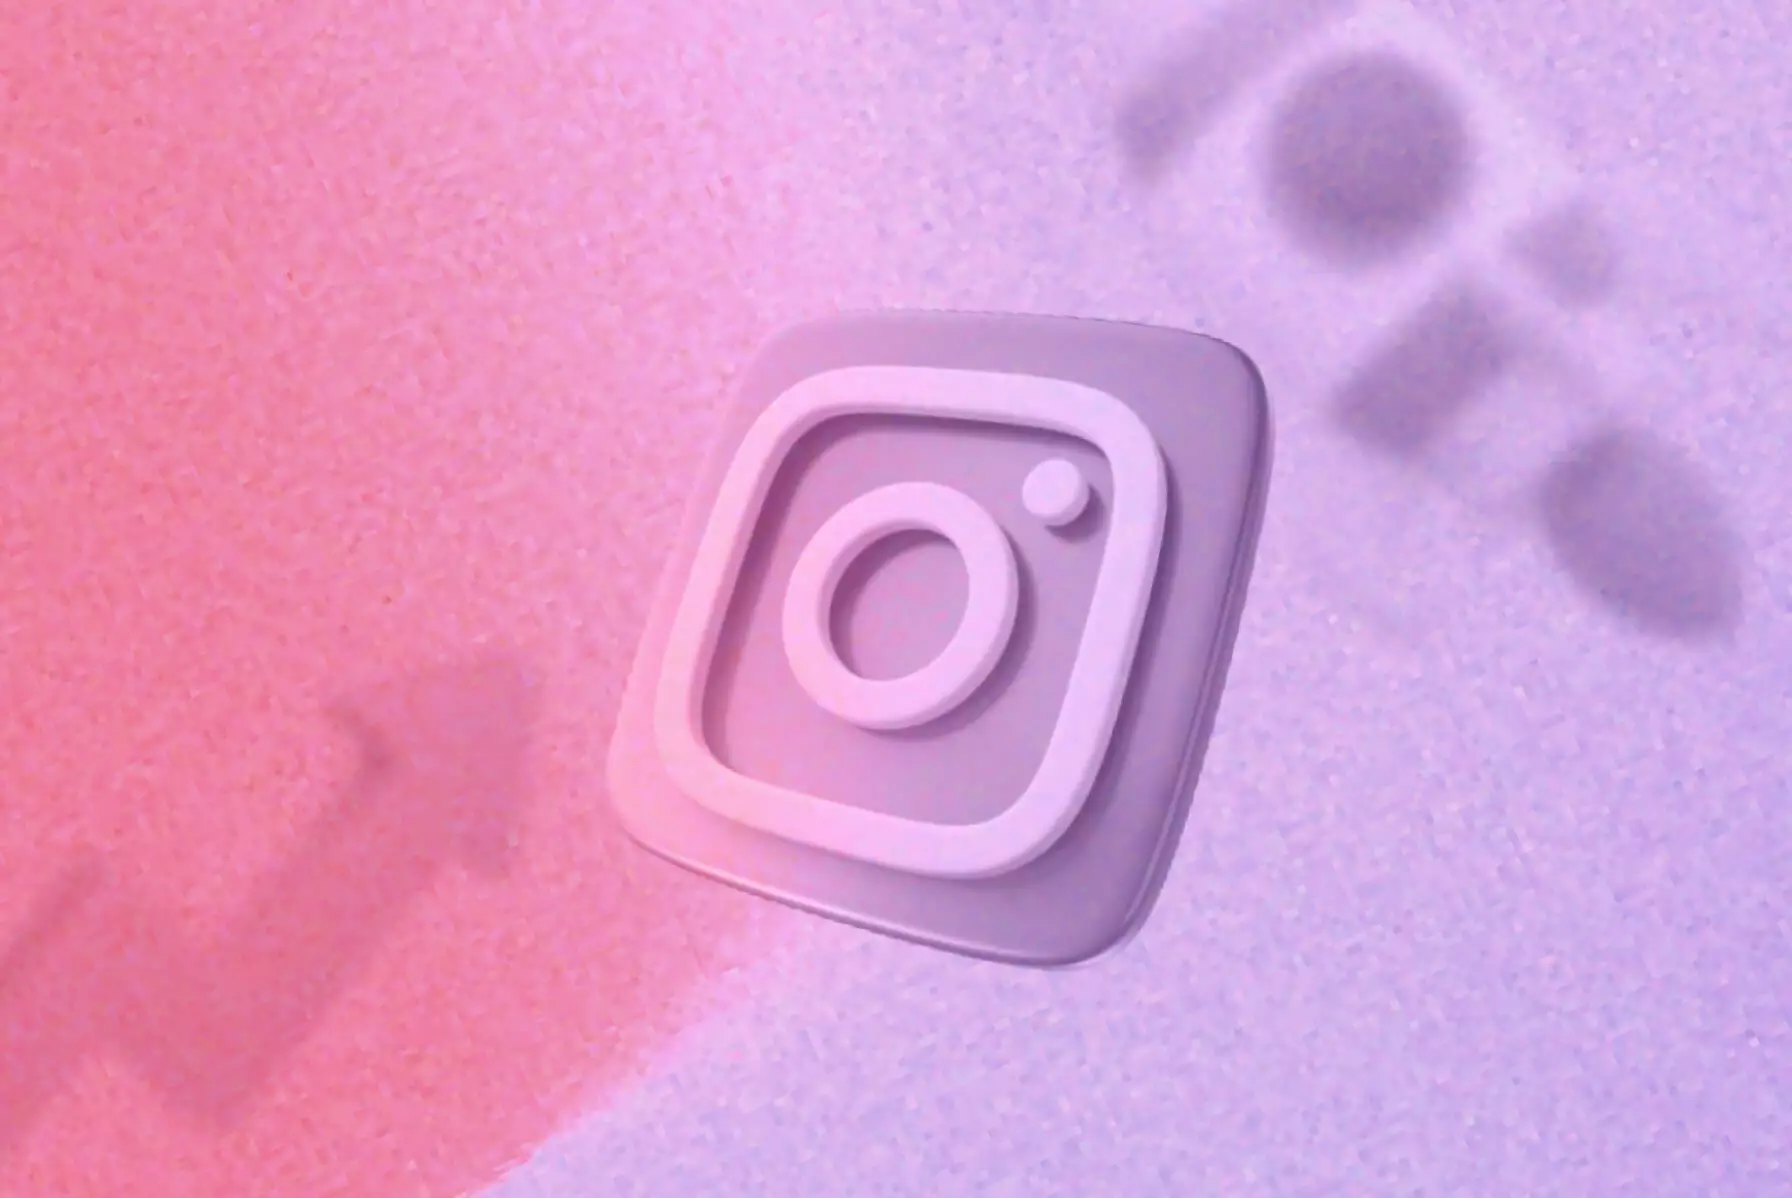 12 Latest Instagram Trends for Maximizing Visibility & Engagement